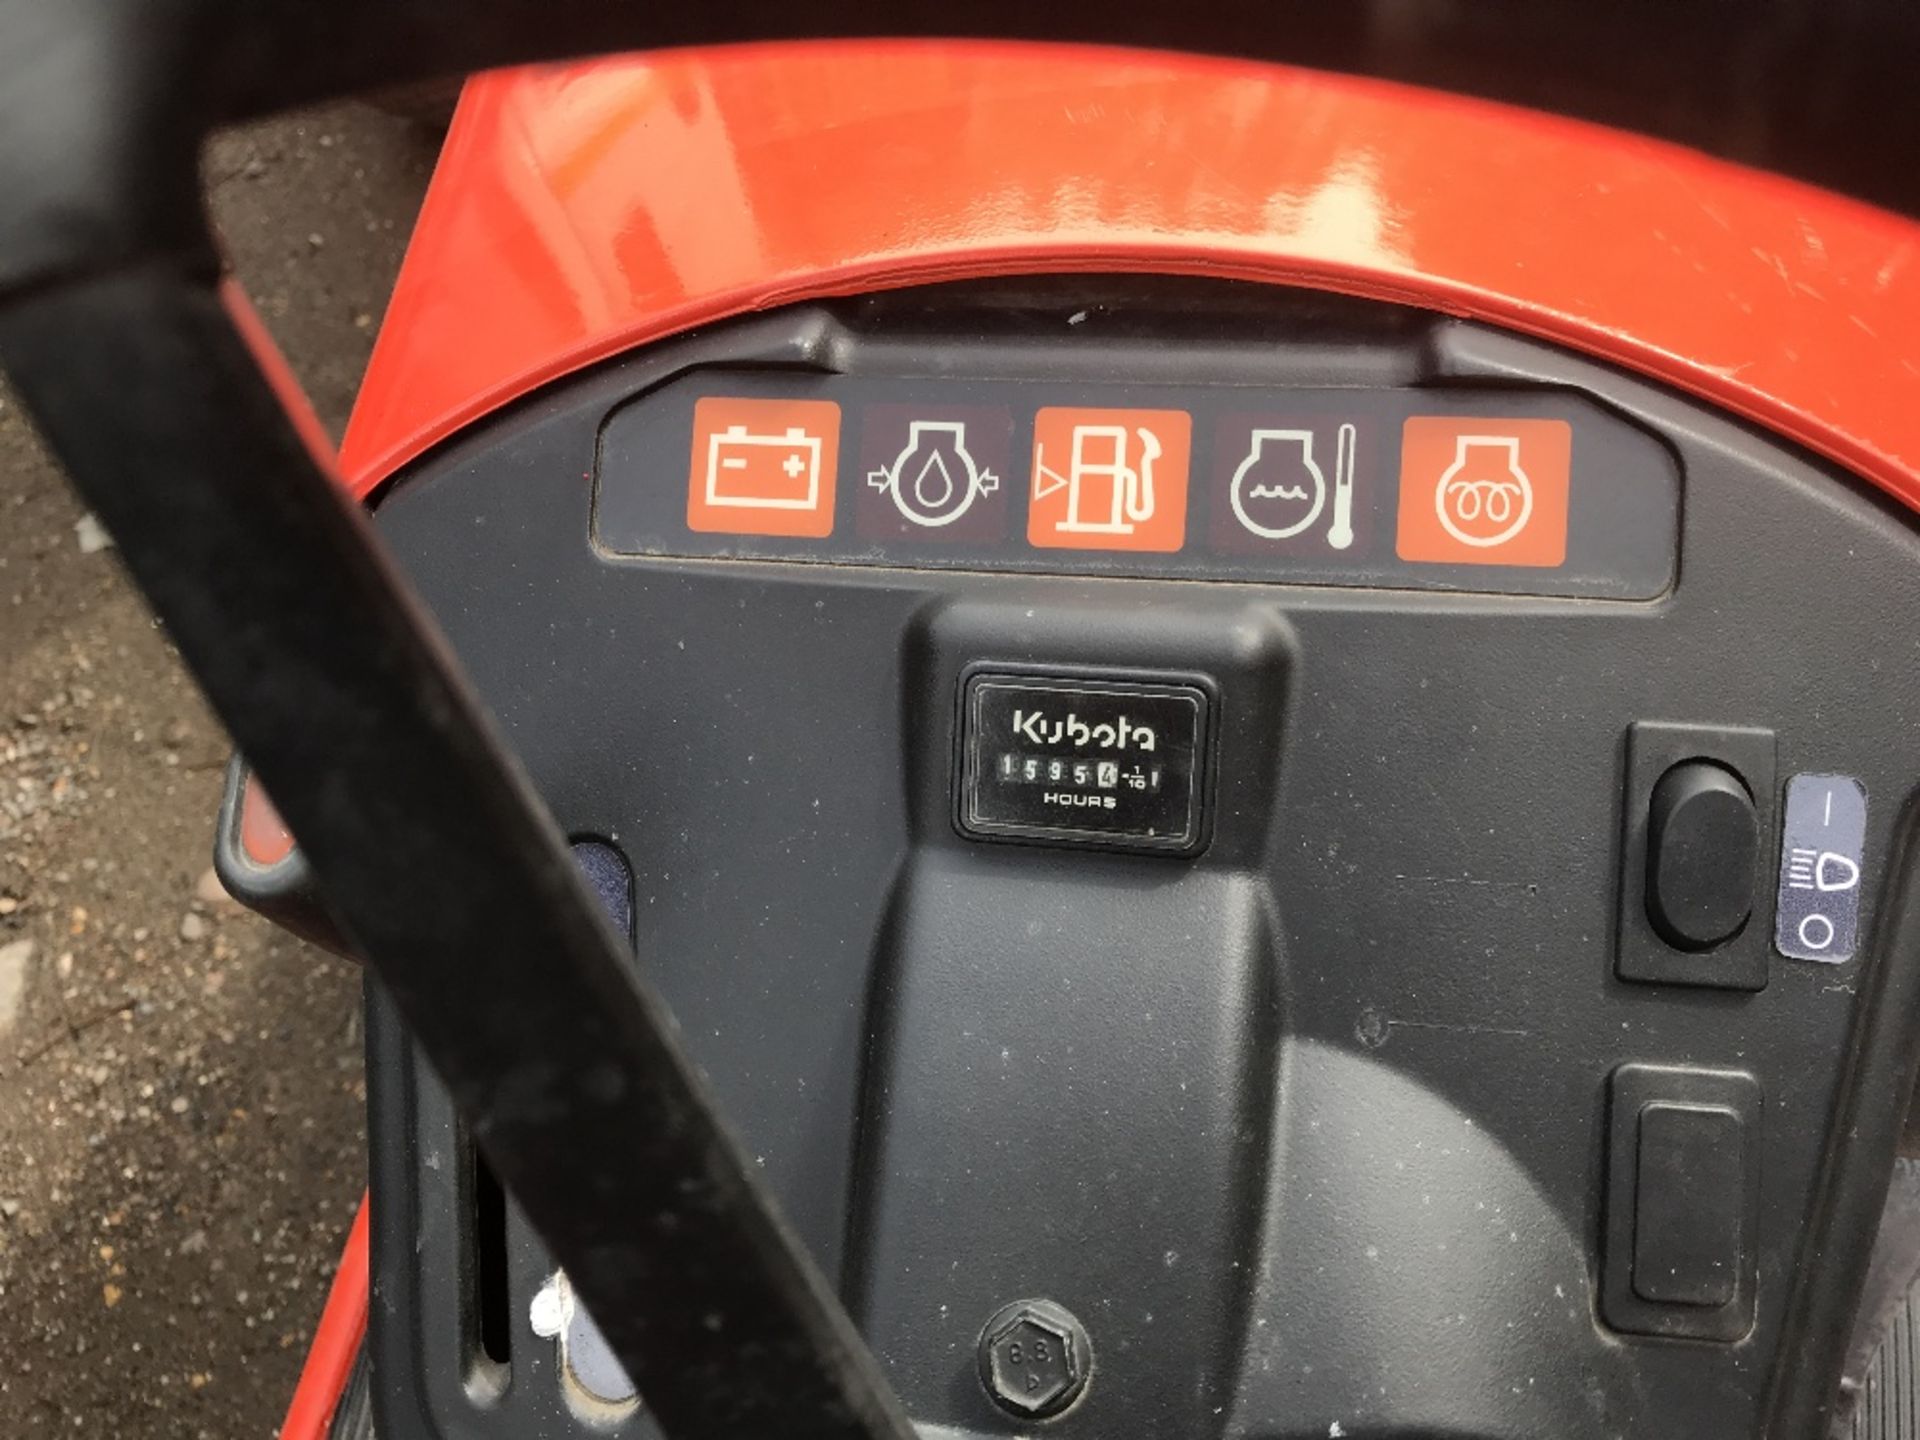 Kubota G2160 diesel mower tractor, reg. EU08 MZV SN: 12402 When tested was seen to run and drive - Image 3 of 3